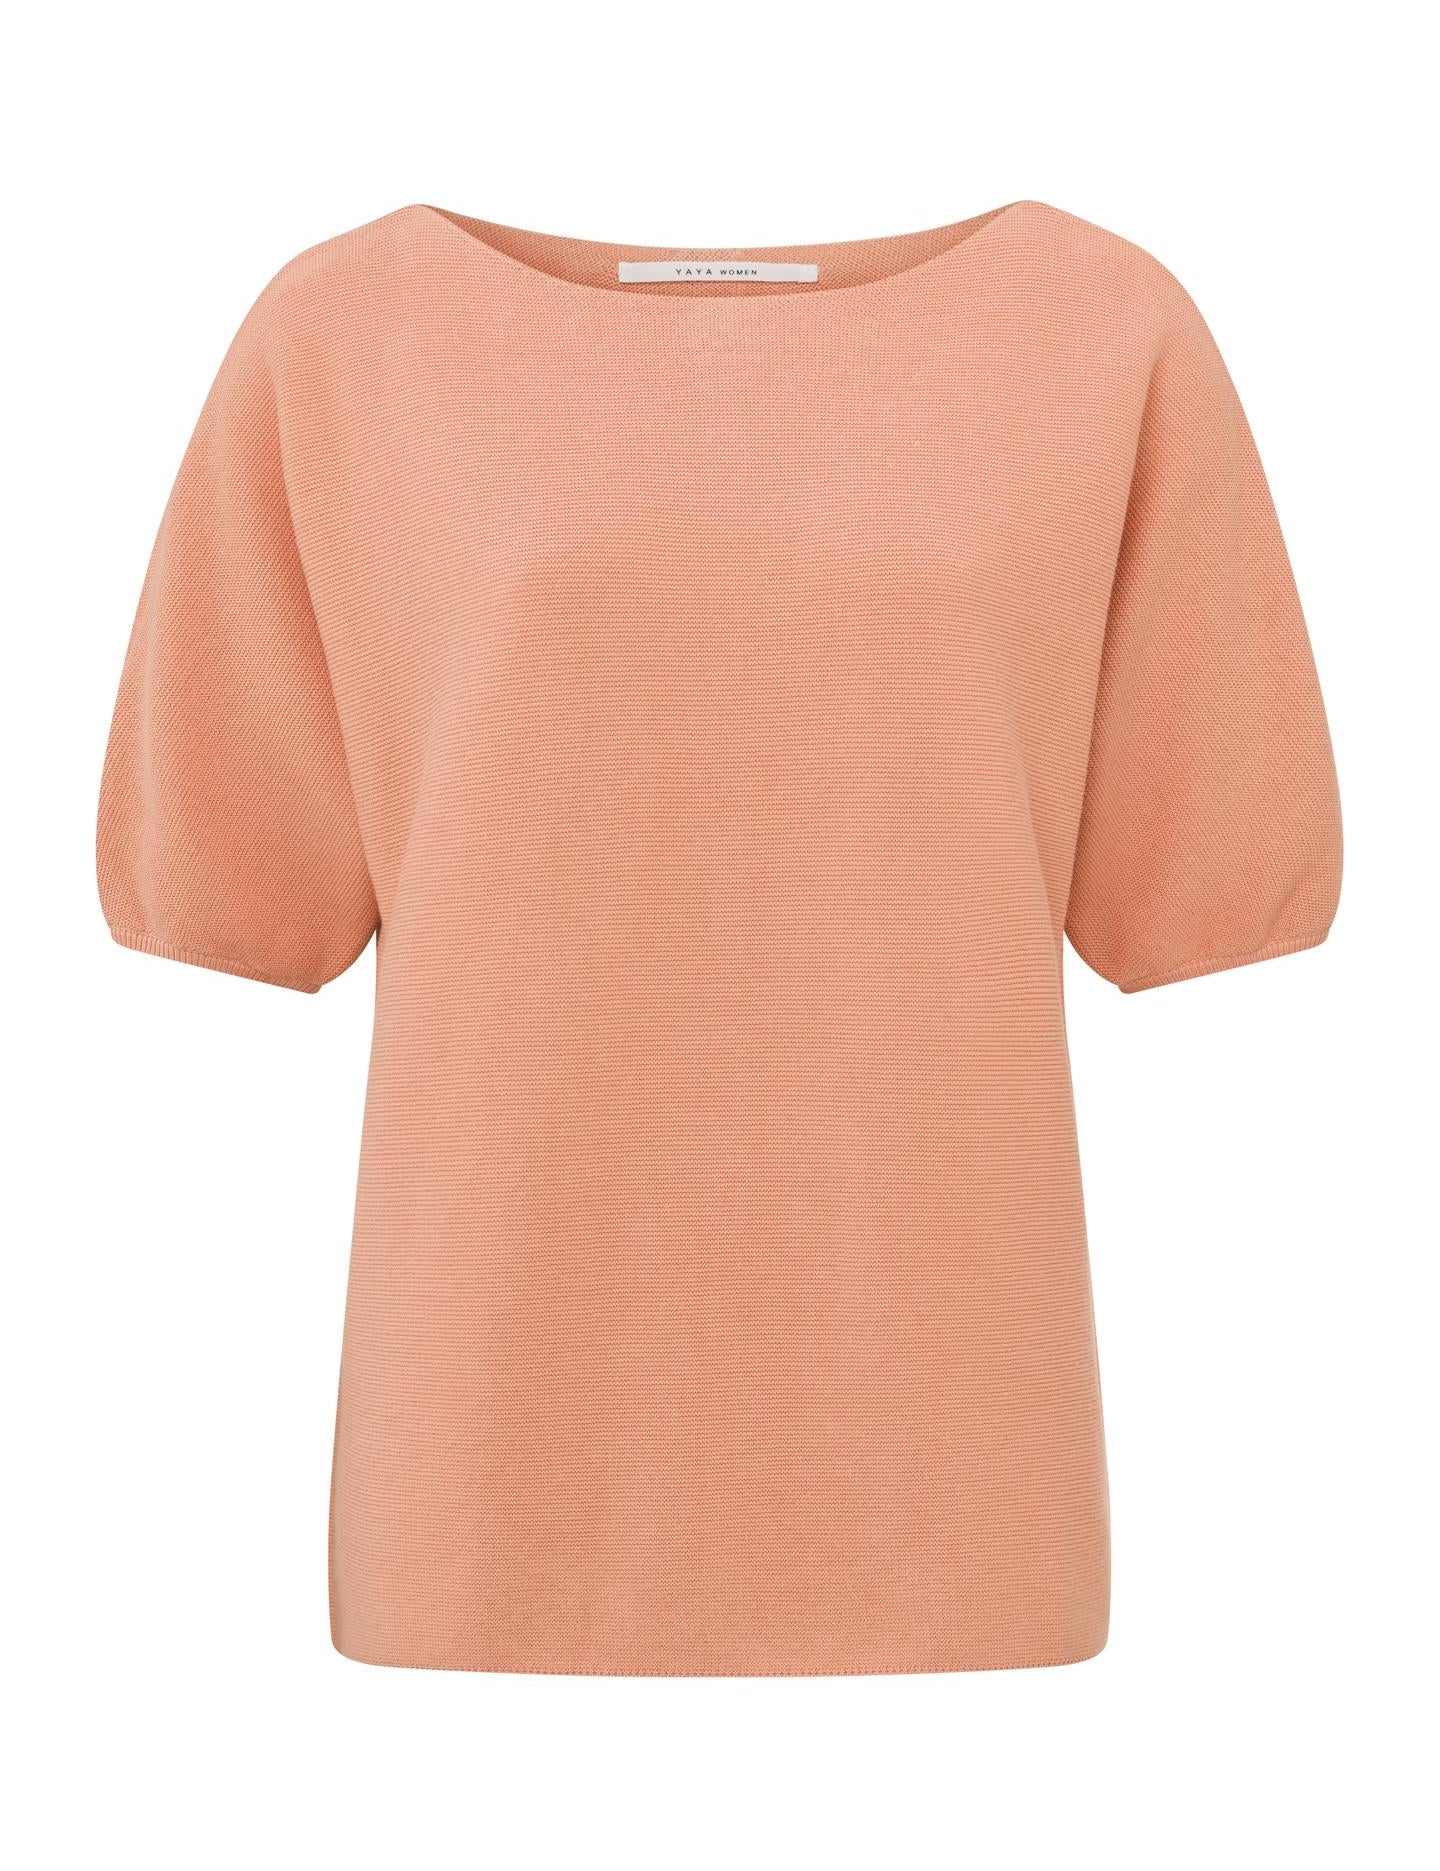 sweater-with-boatneck-and-short-balloon-sleeves-in-cotton-dusty-coral-orange_2880x_27717c97-0f16-4f10-8b2c-ac08f14b864c.jpg